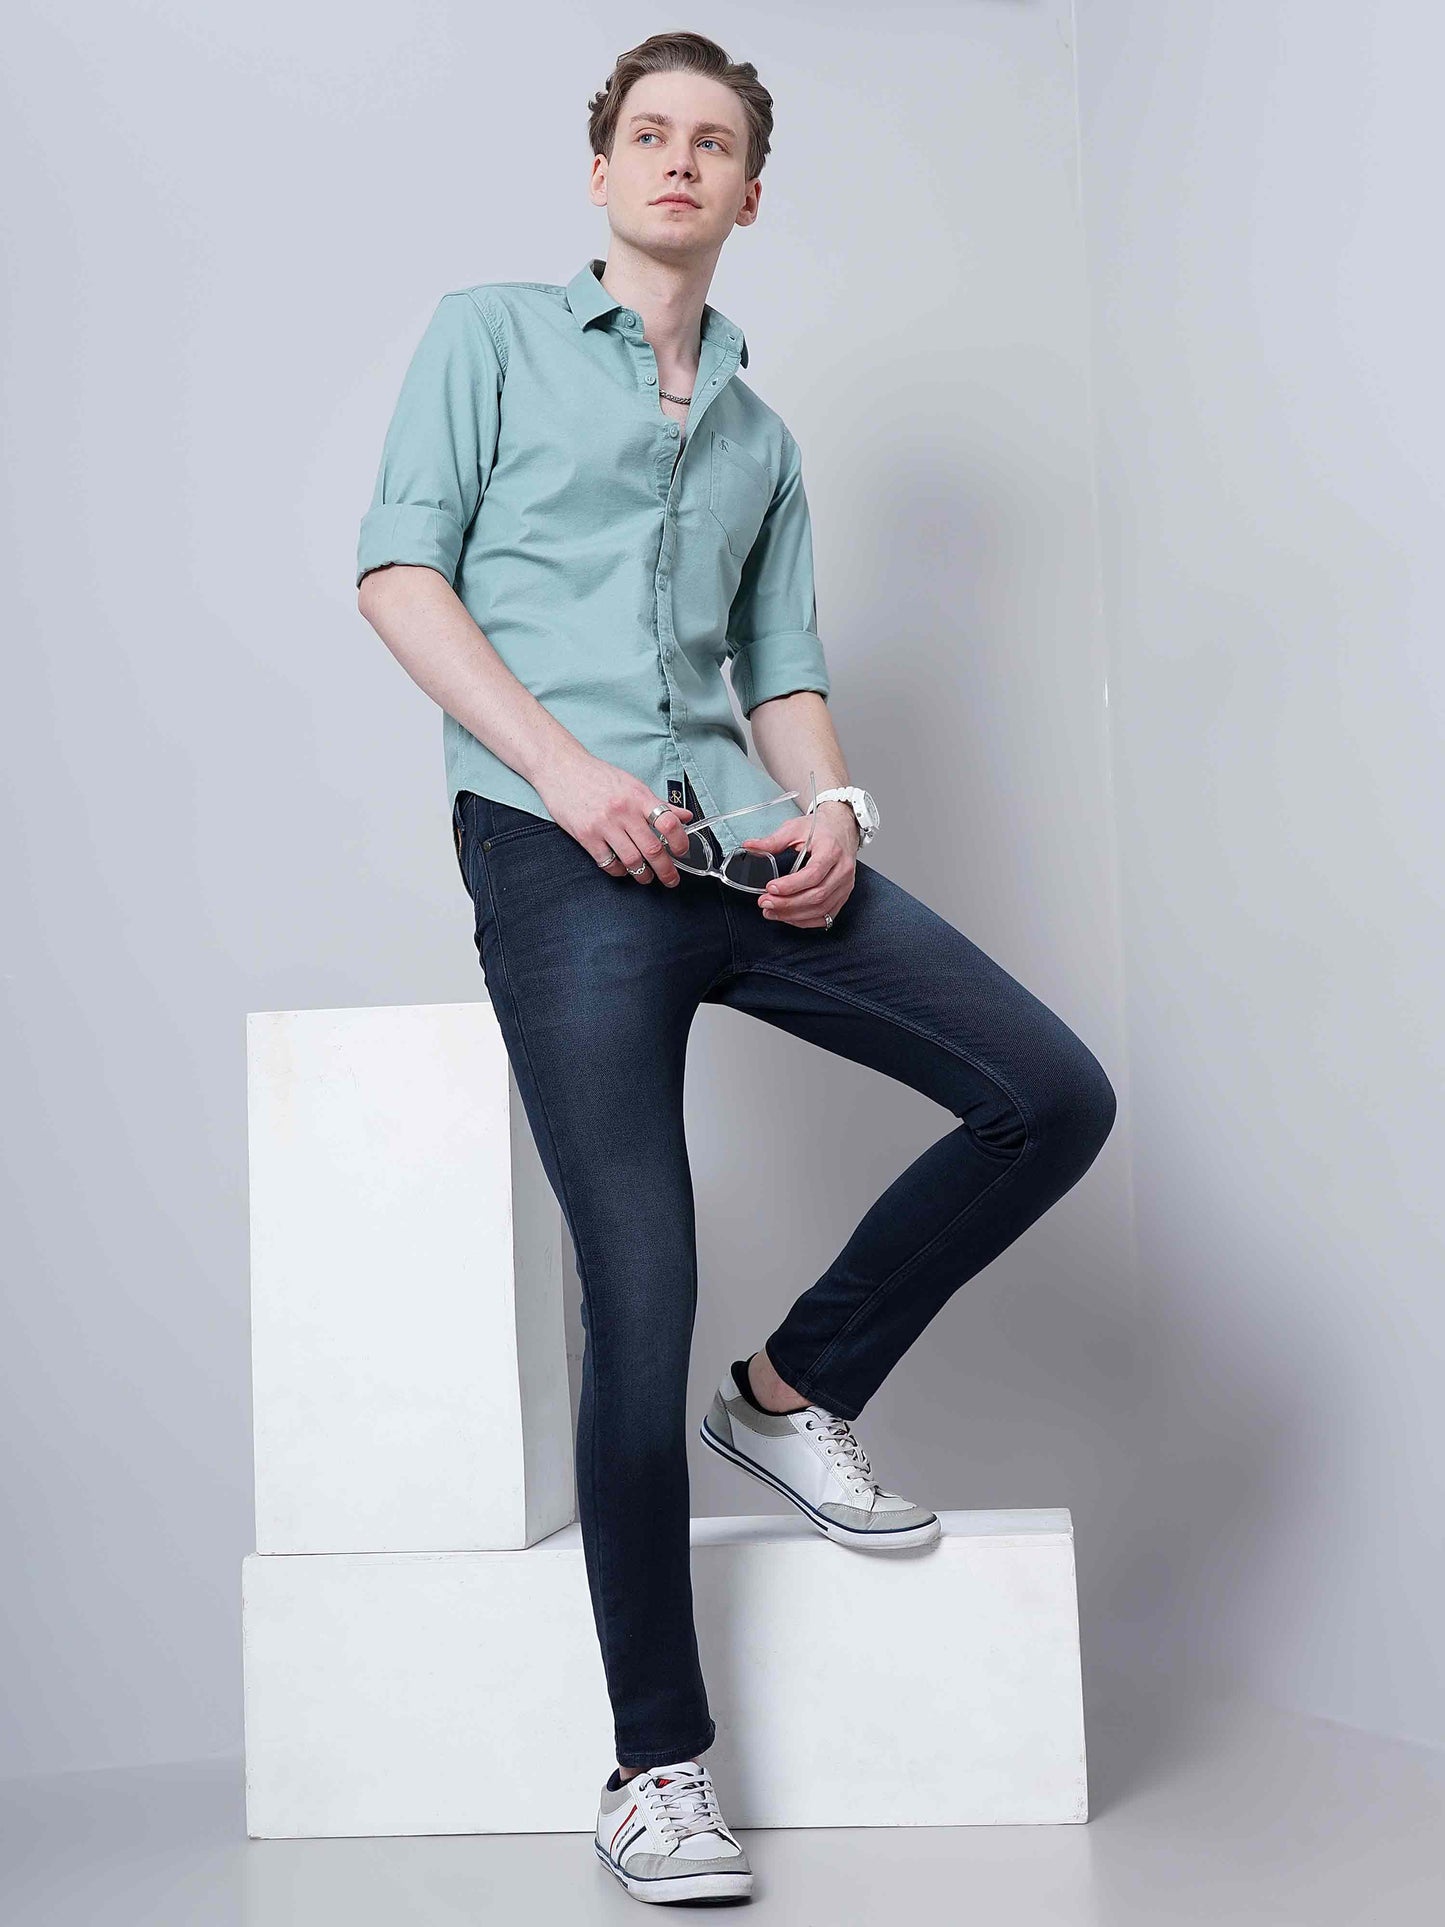 Cloudly Blue Solid Shirt for Men 